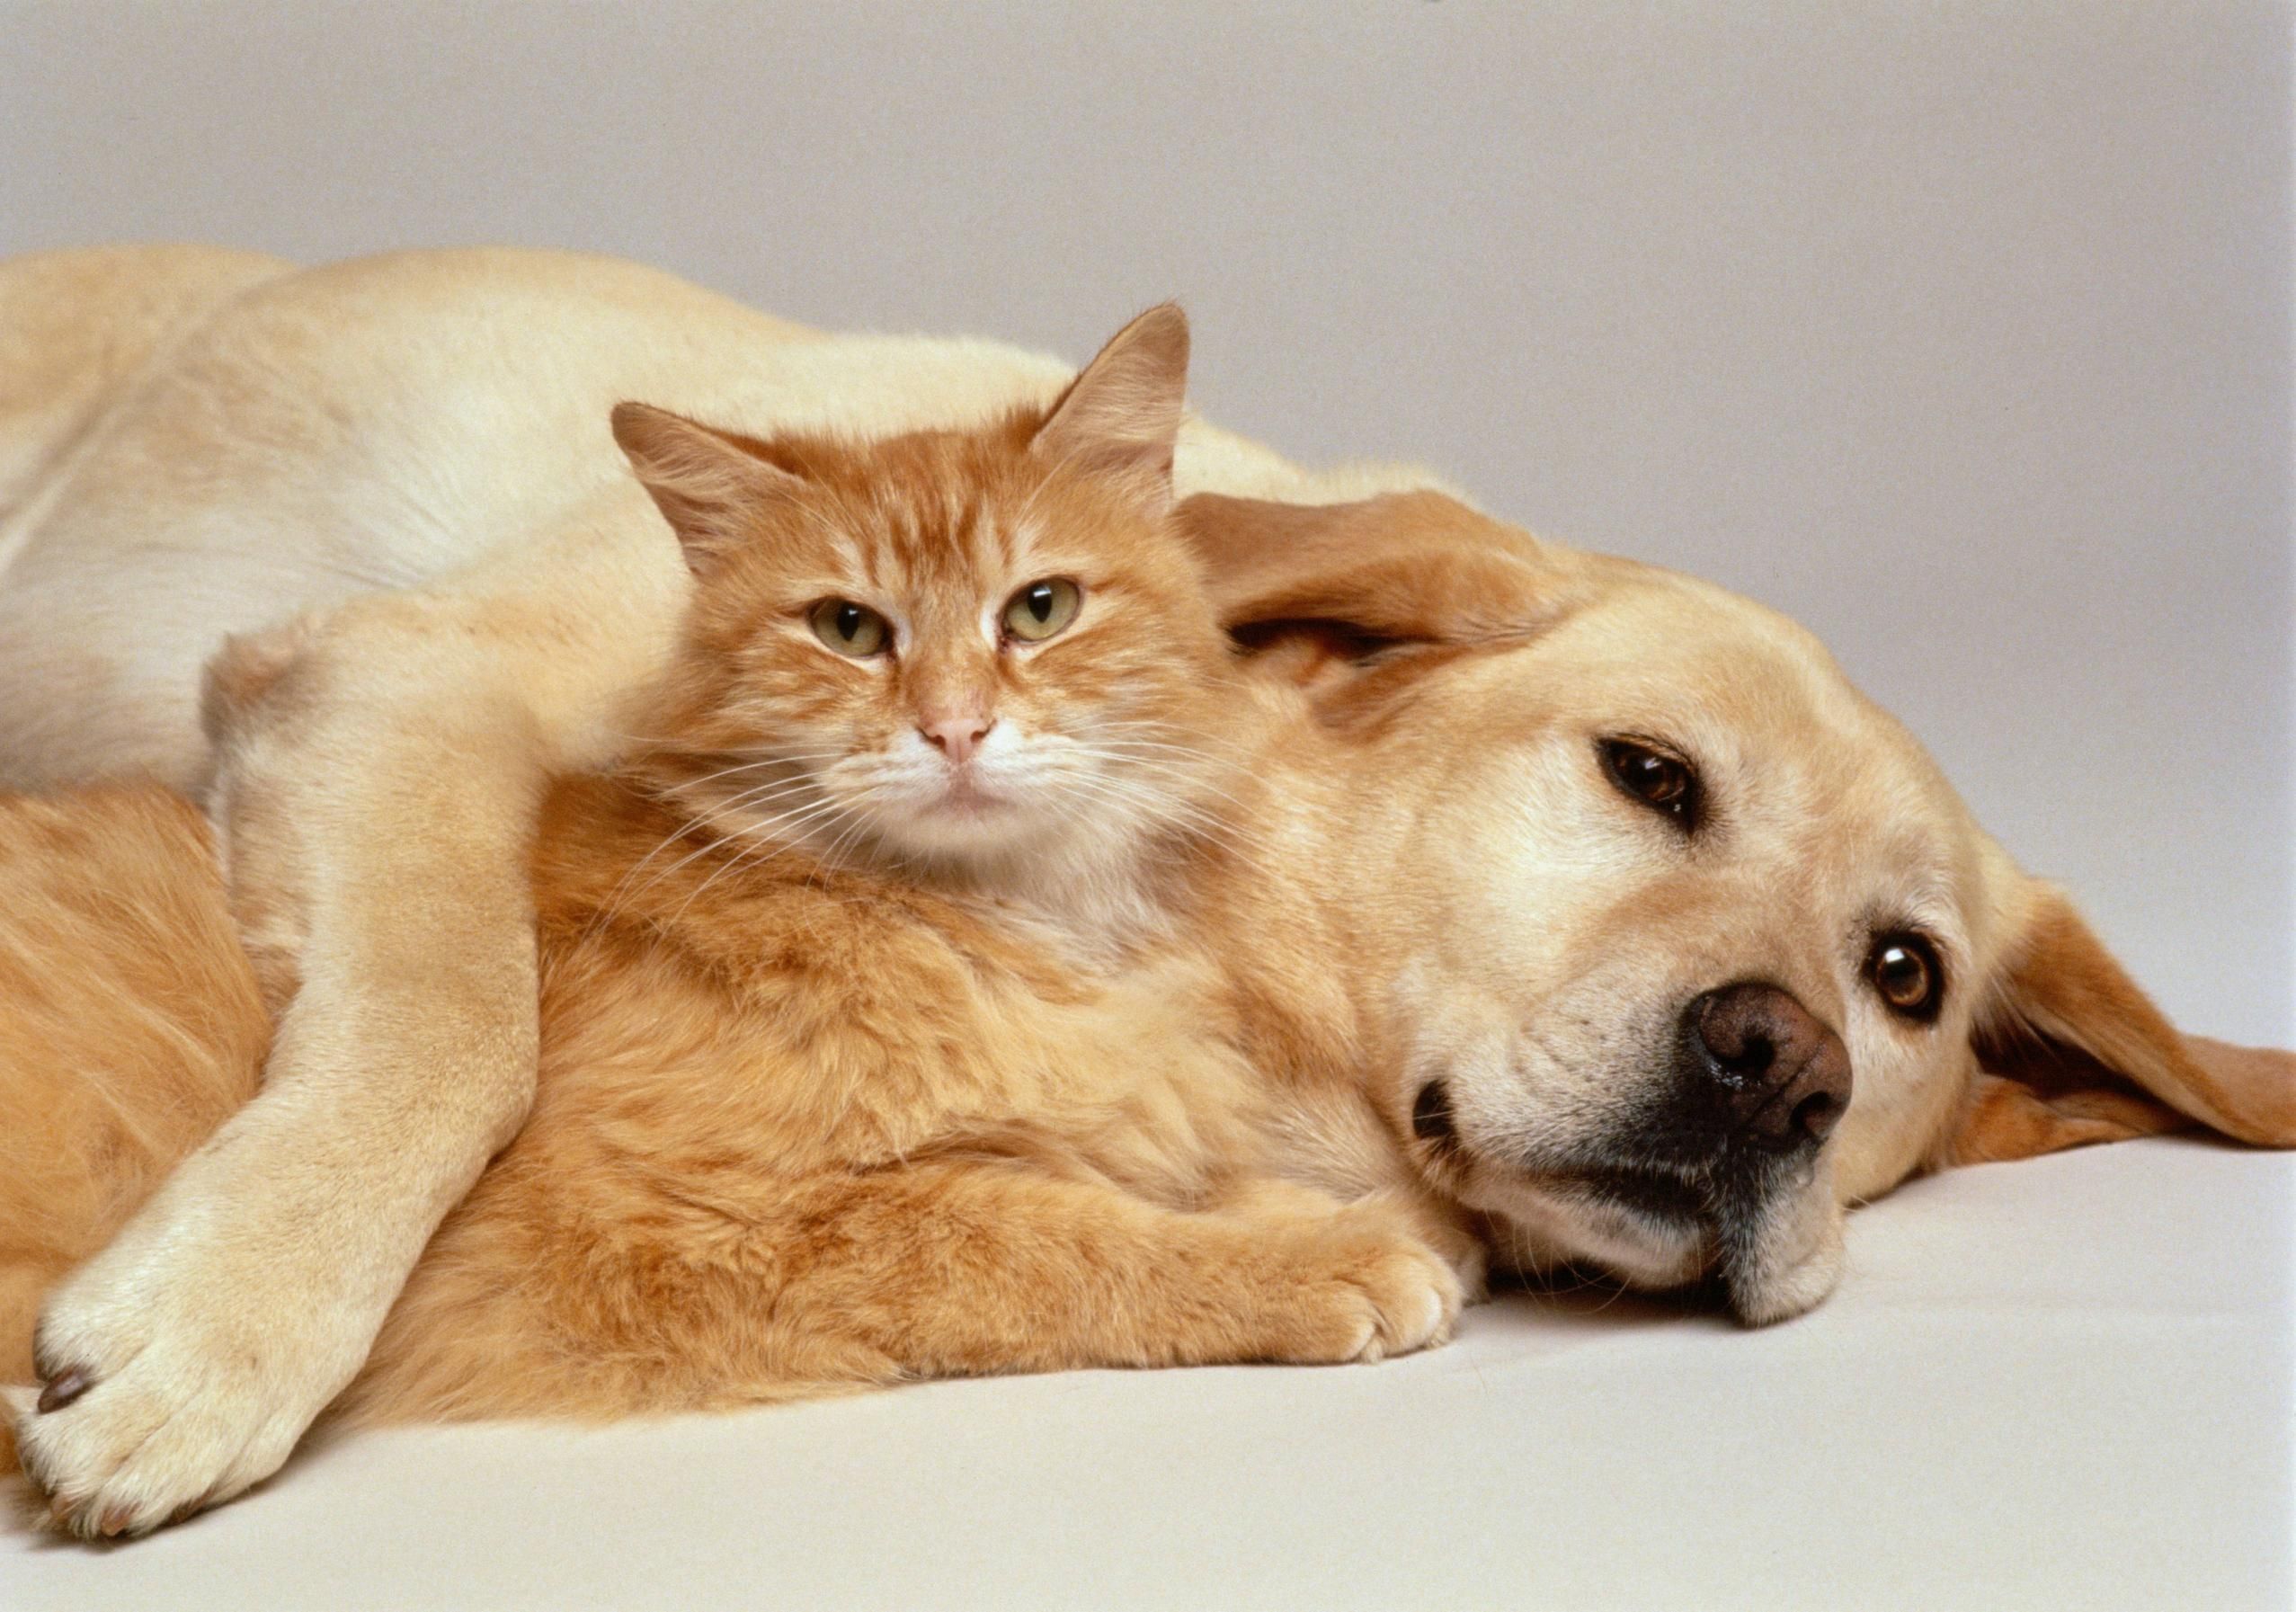 Wallpaper Of Cute Cats And Dogs Cat And Dog Wallpaper And Dog Couple